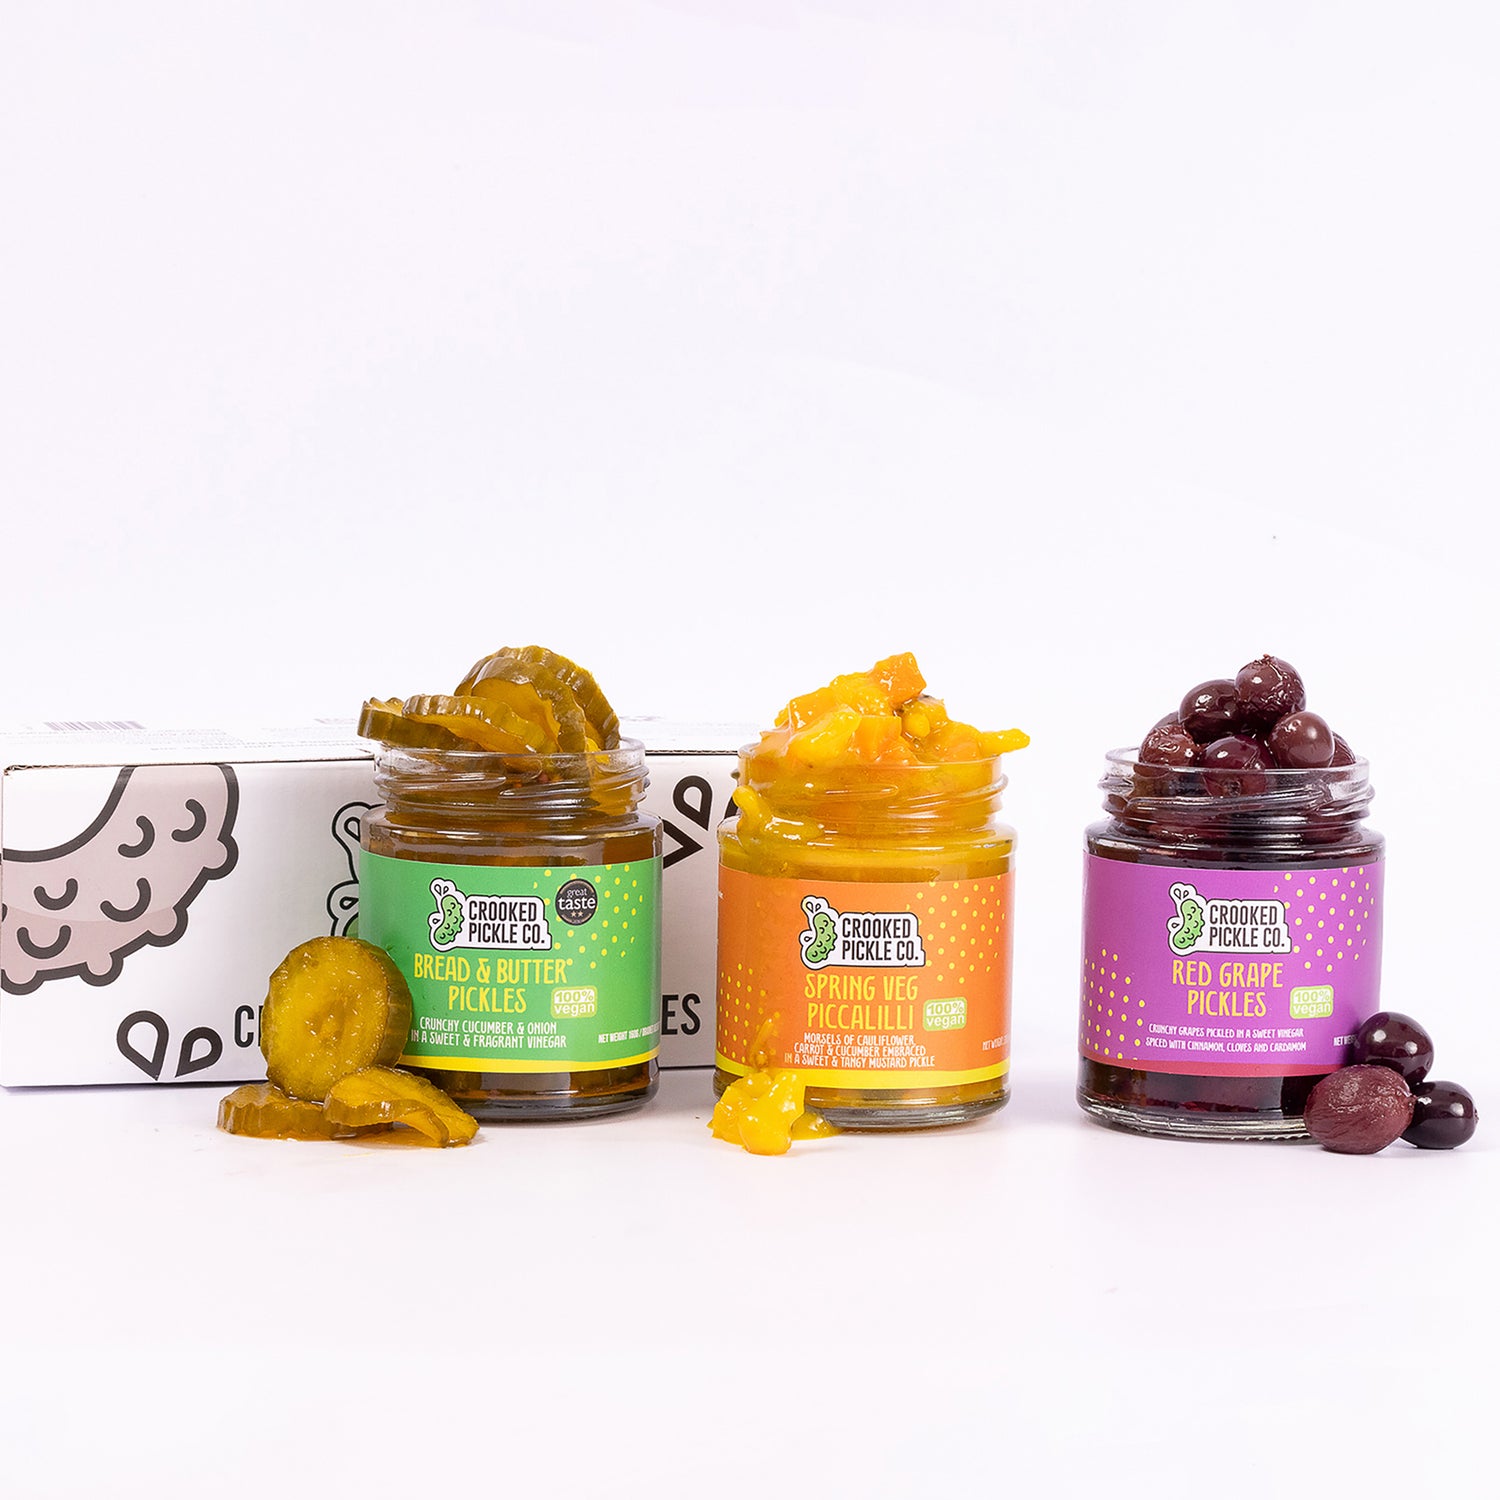 Pickle gift set in a box, for foodies, stocking fillers and Christmas hampers.